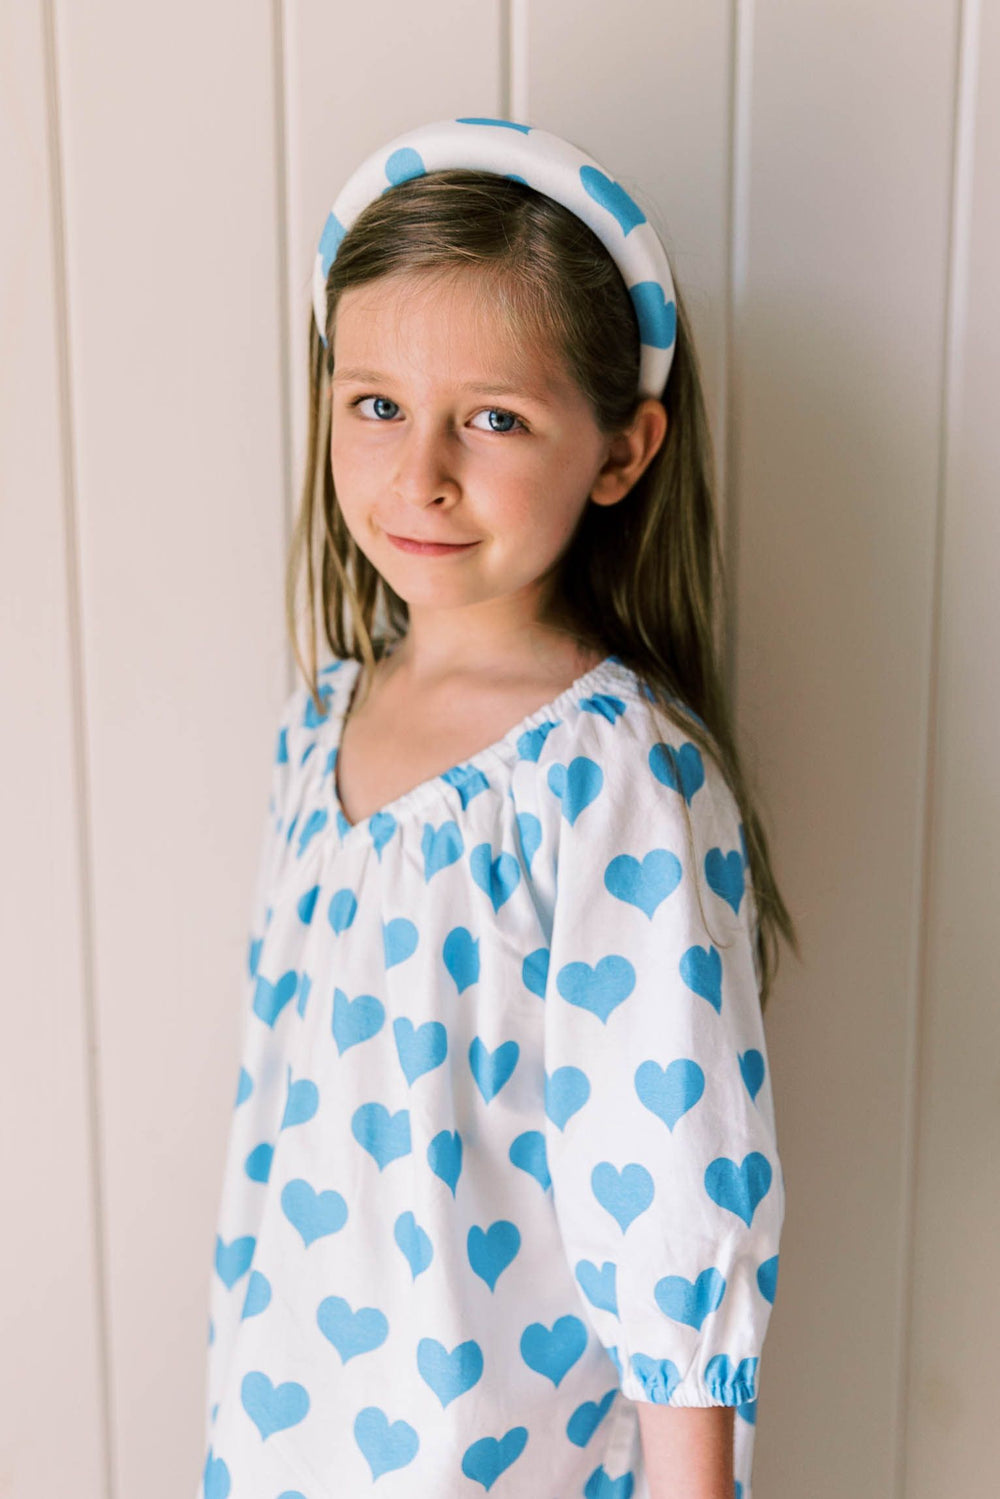 Girl's Parker House Dress in Blue Hearts